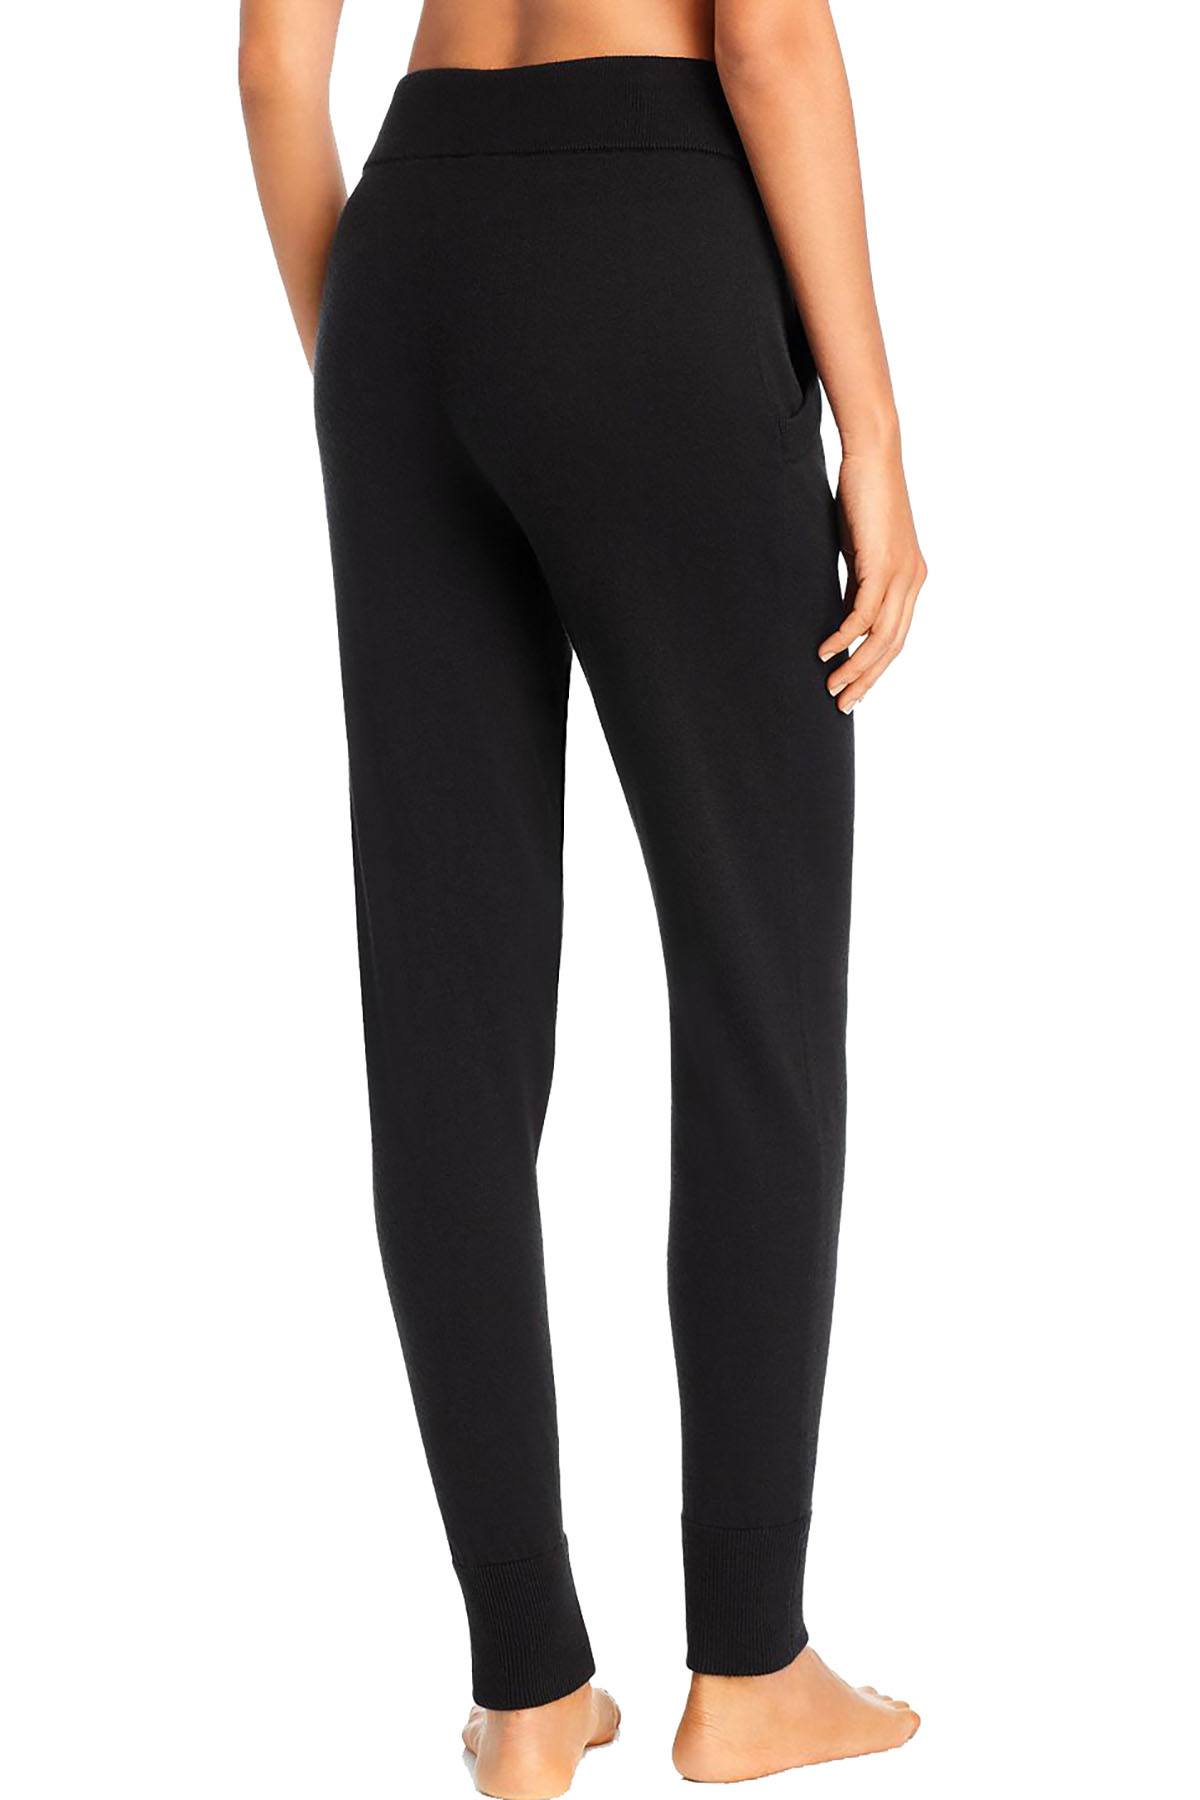 Calvin Klein Sweater Knit Jogger Pant in Black